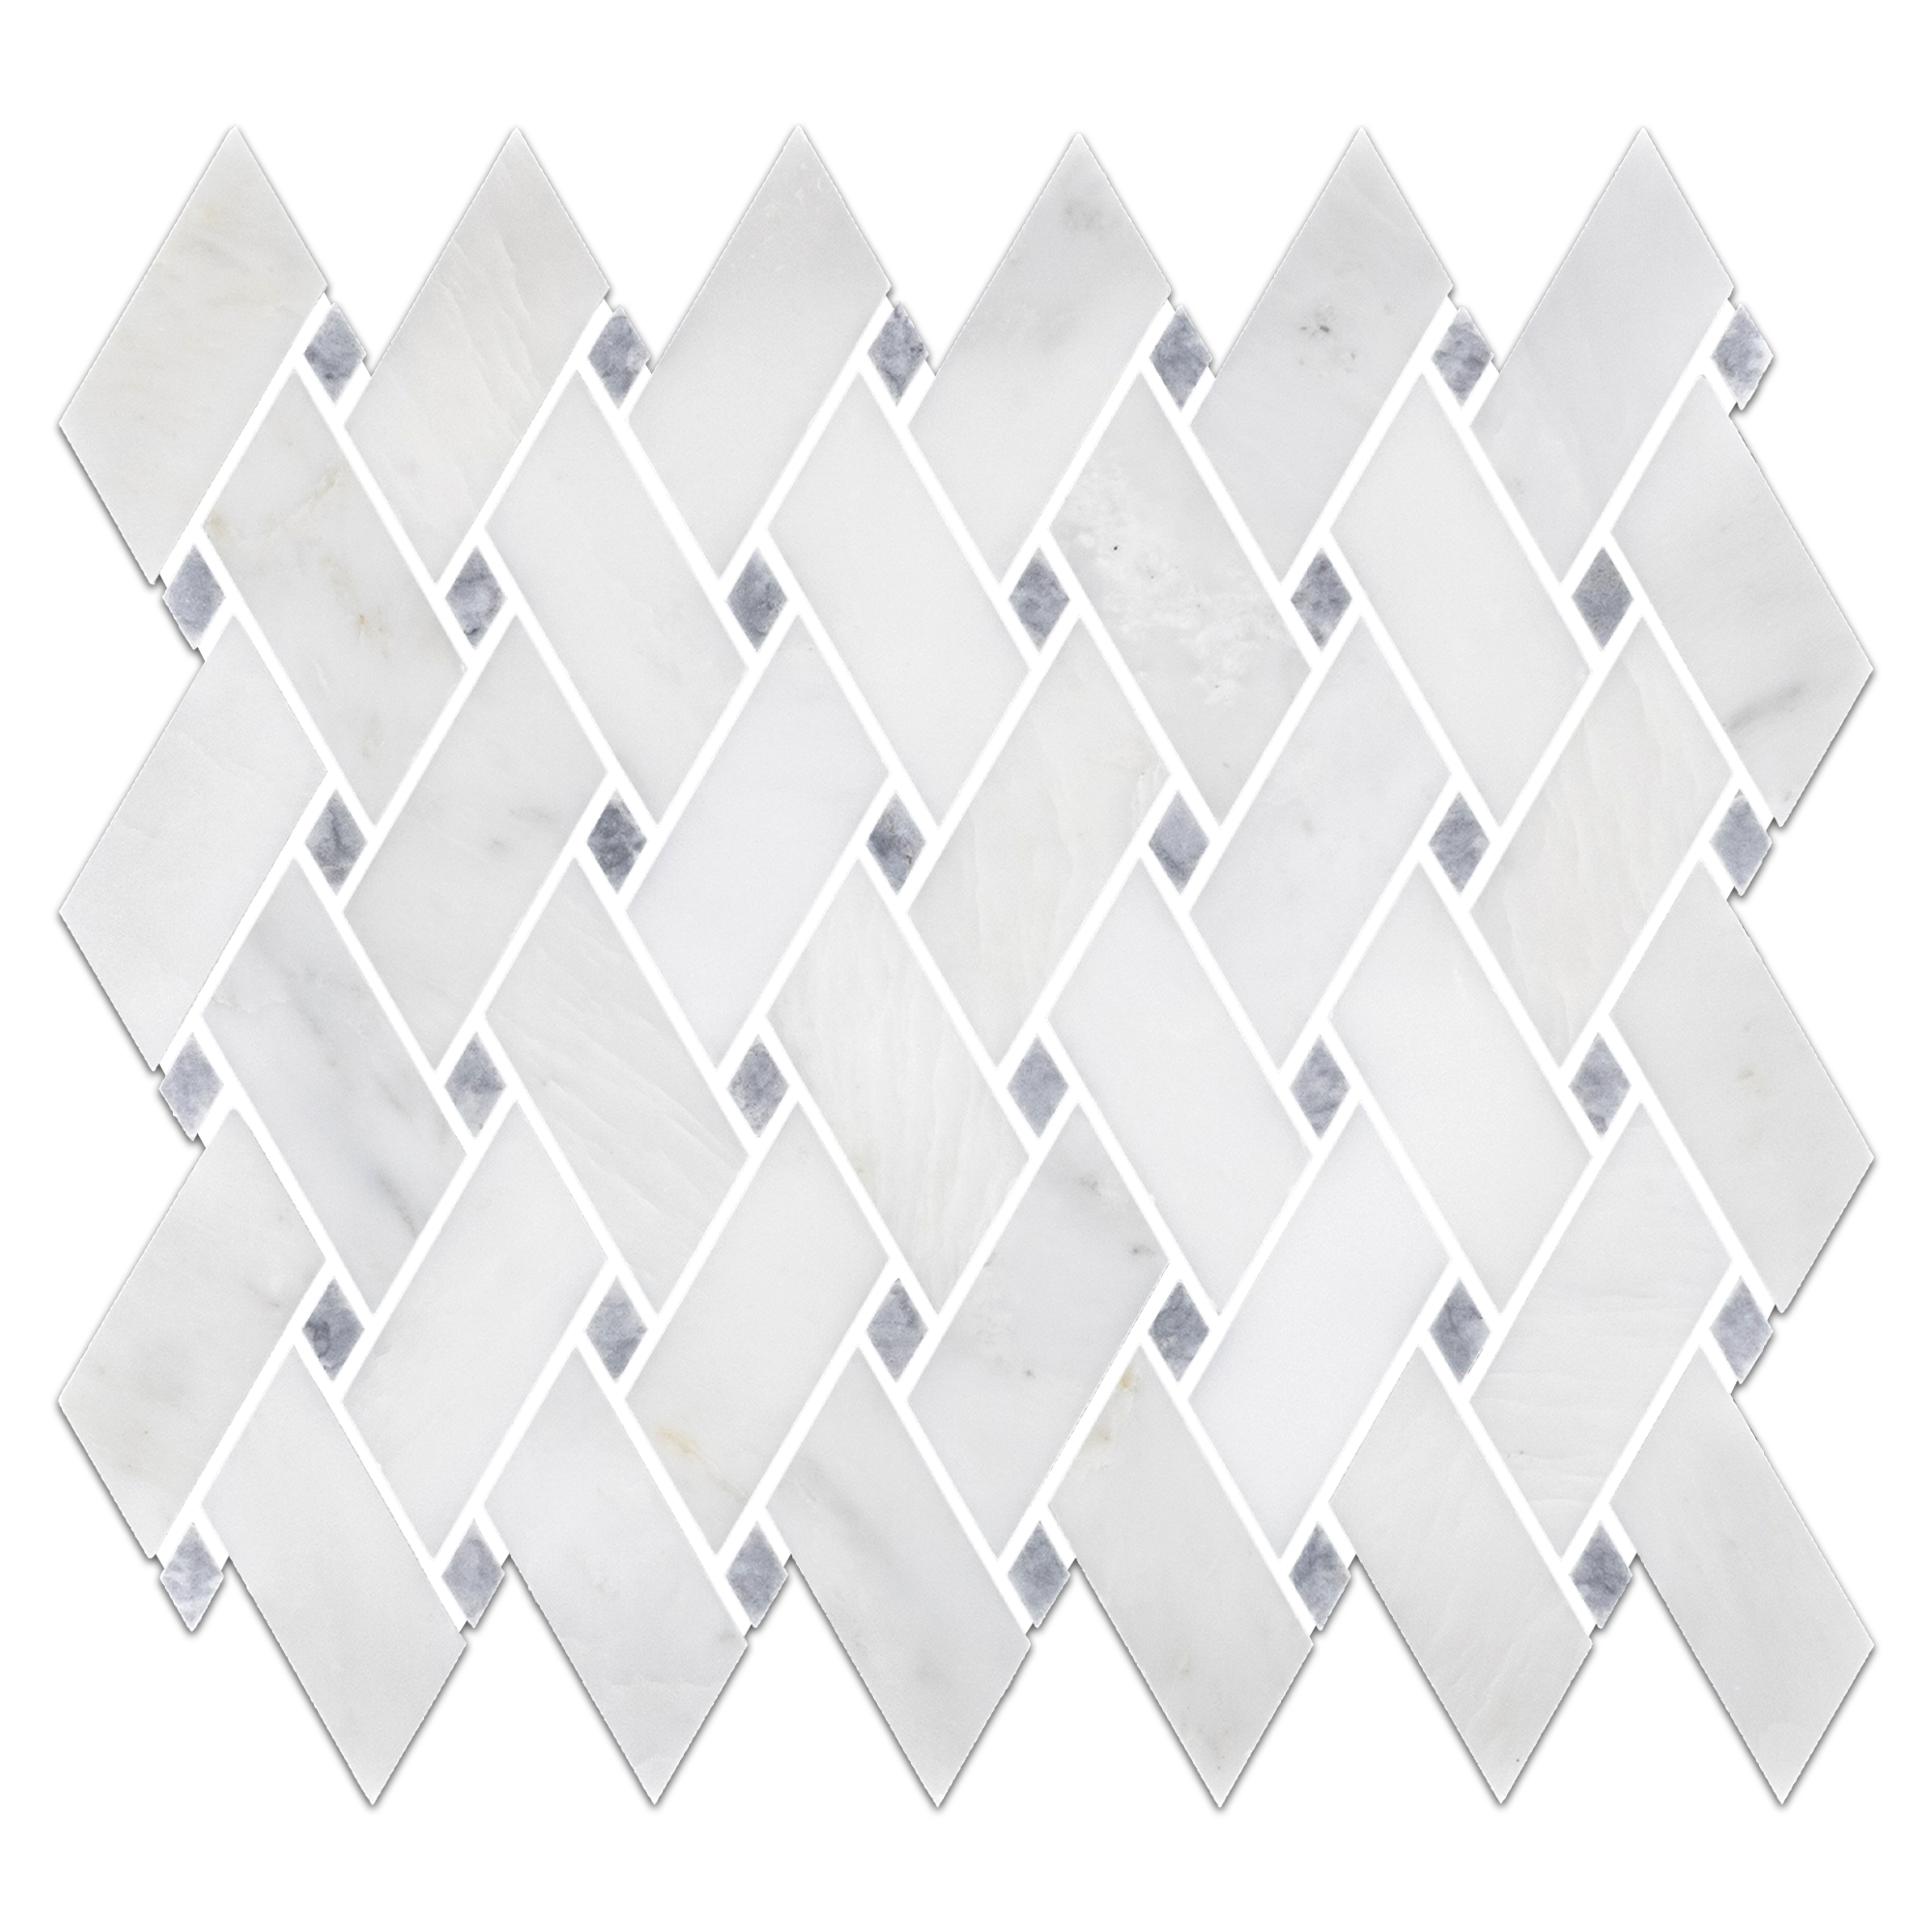 Elon Pearl White Pacific Gray Marble Sheared Basketweave Field Mosaic 10.1875x11.3125x0.375 Polished AM8630P Surface Group International Product